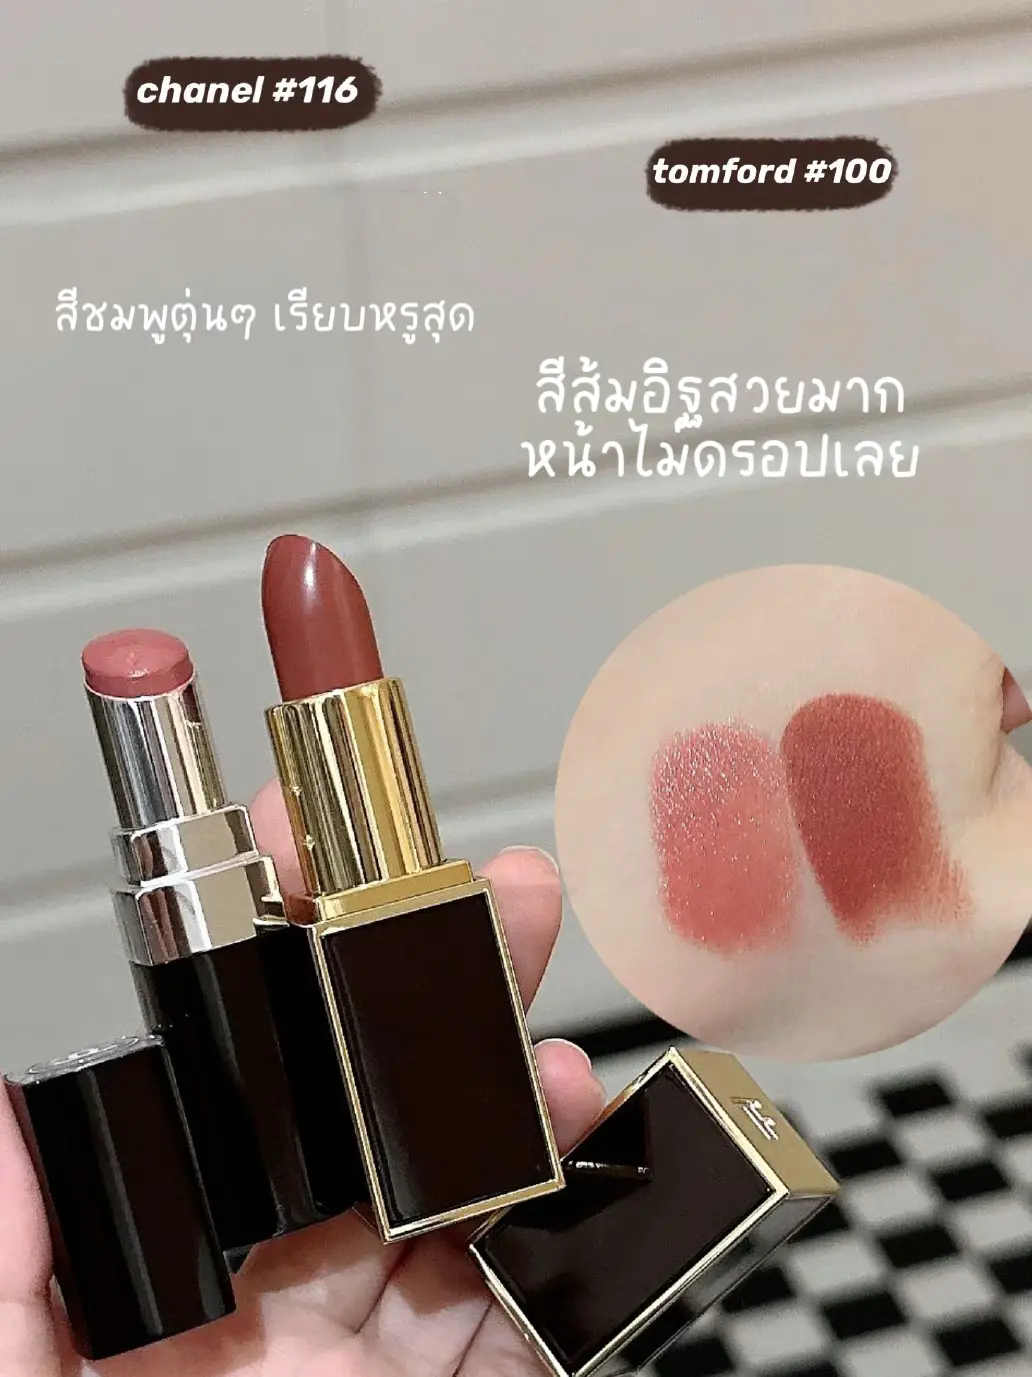 Favorite Lipstick Bar Review, Gallery posted by Gyeolii